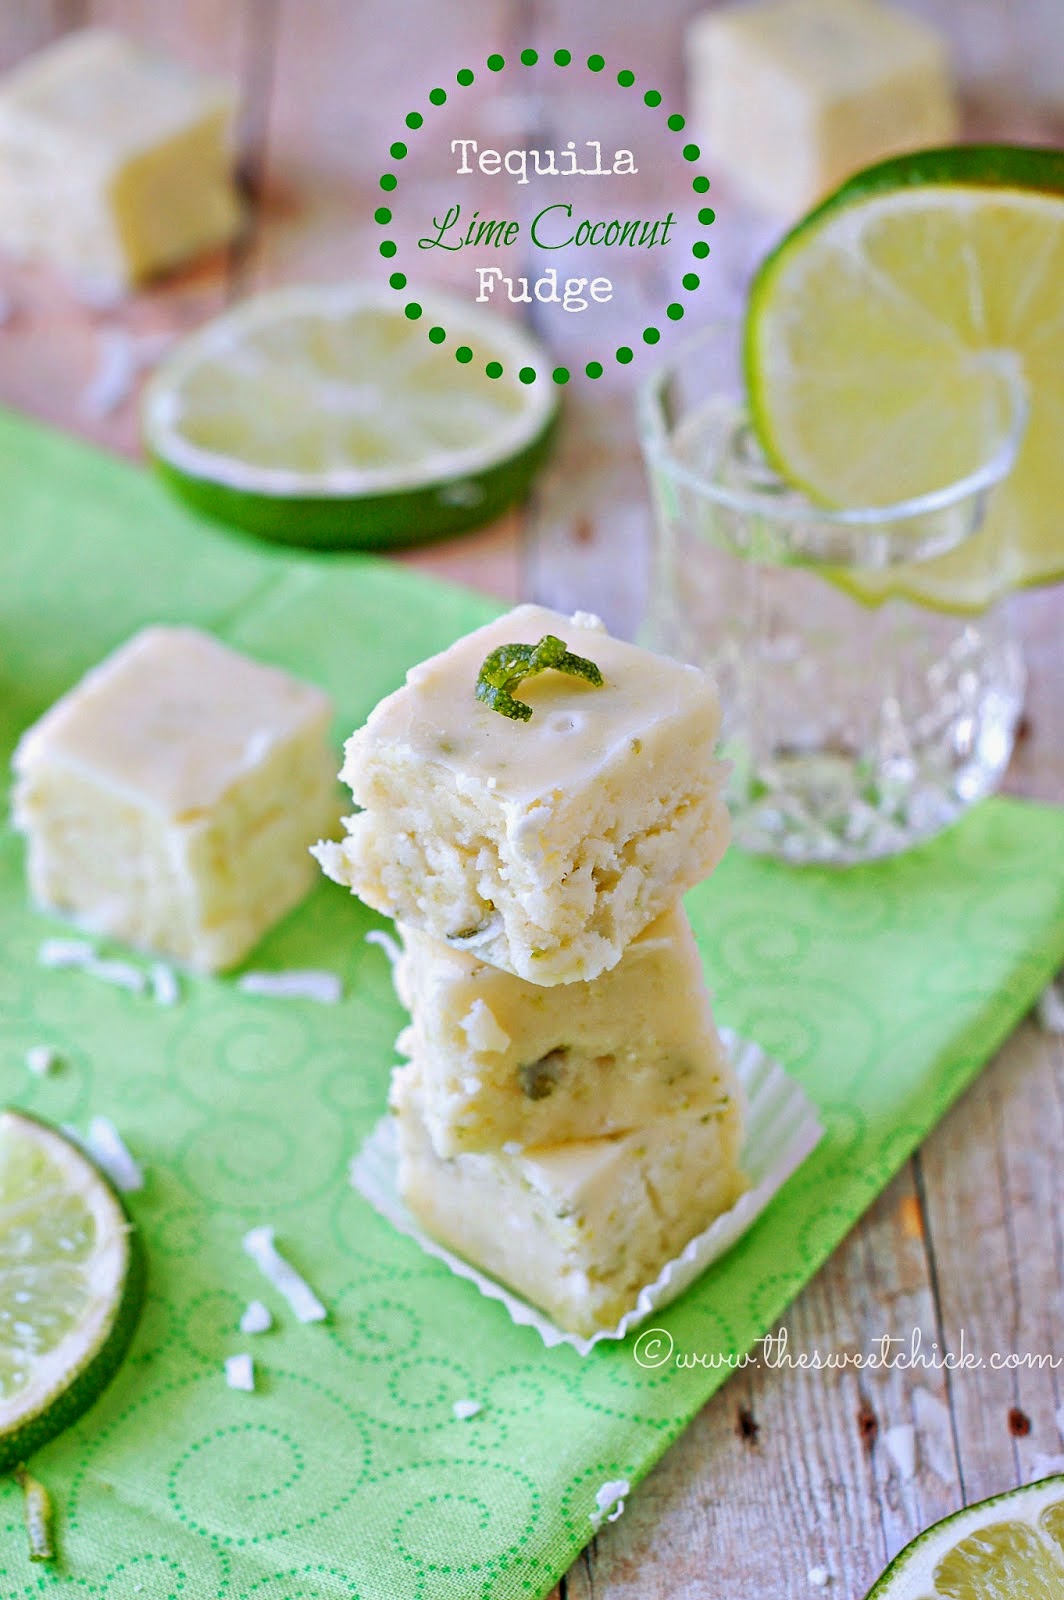 Tequila Lime Coconut Fudge - The Sweet Chick